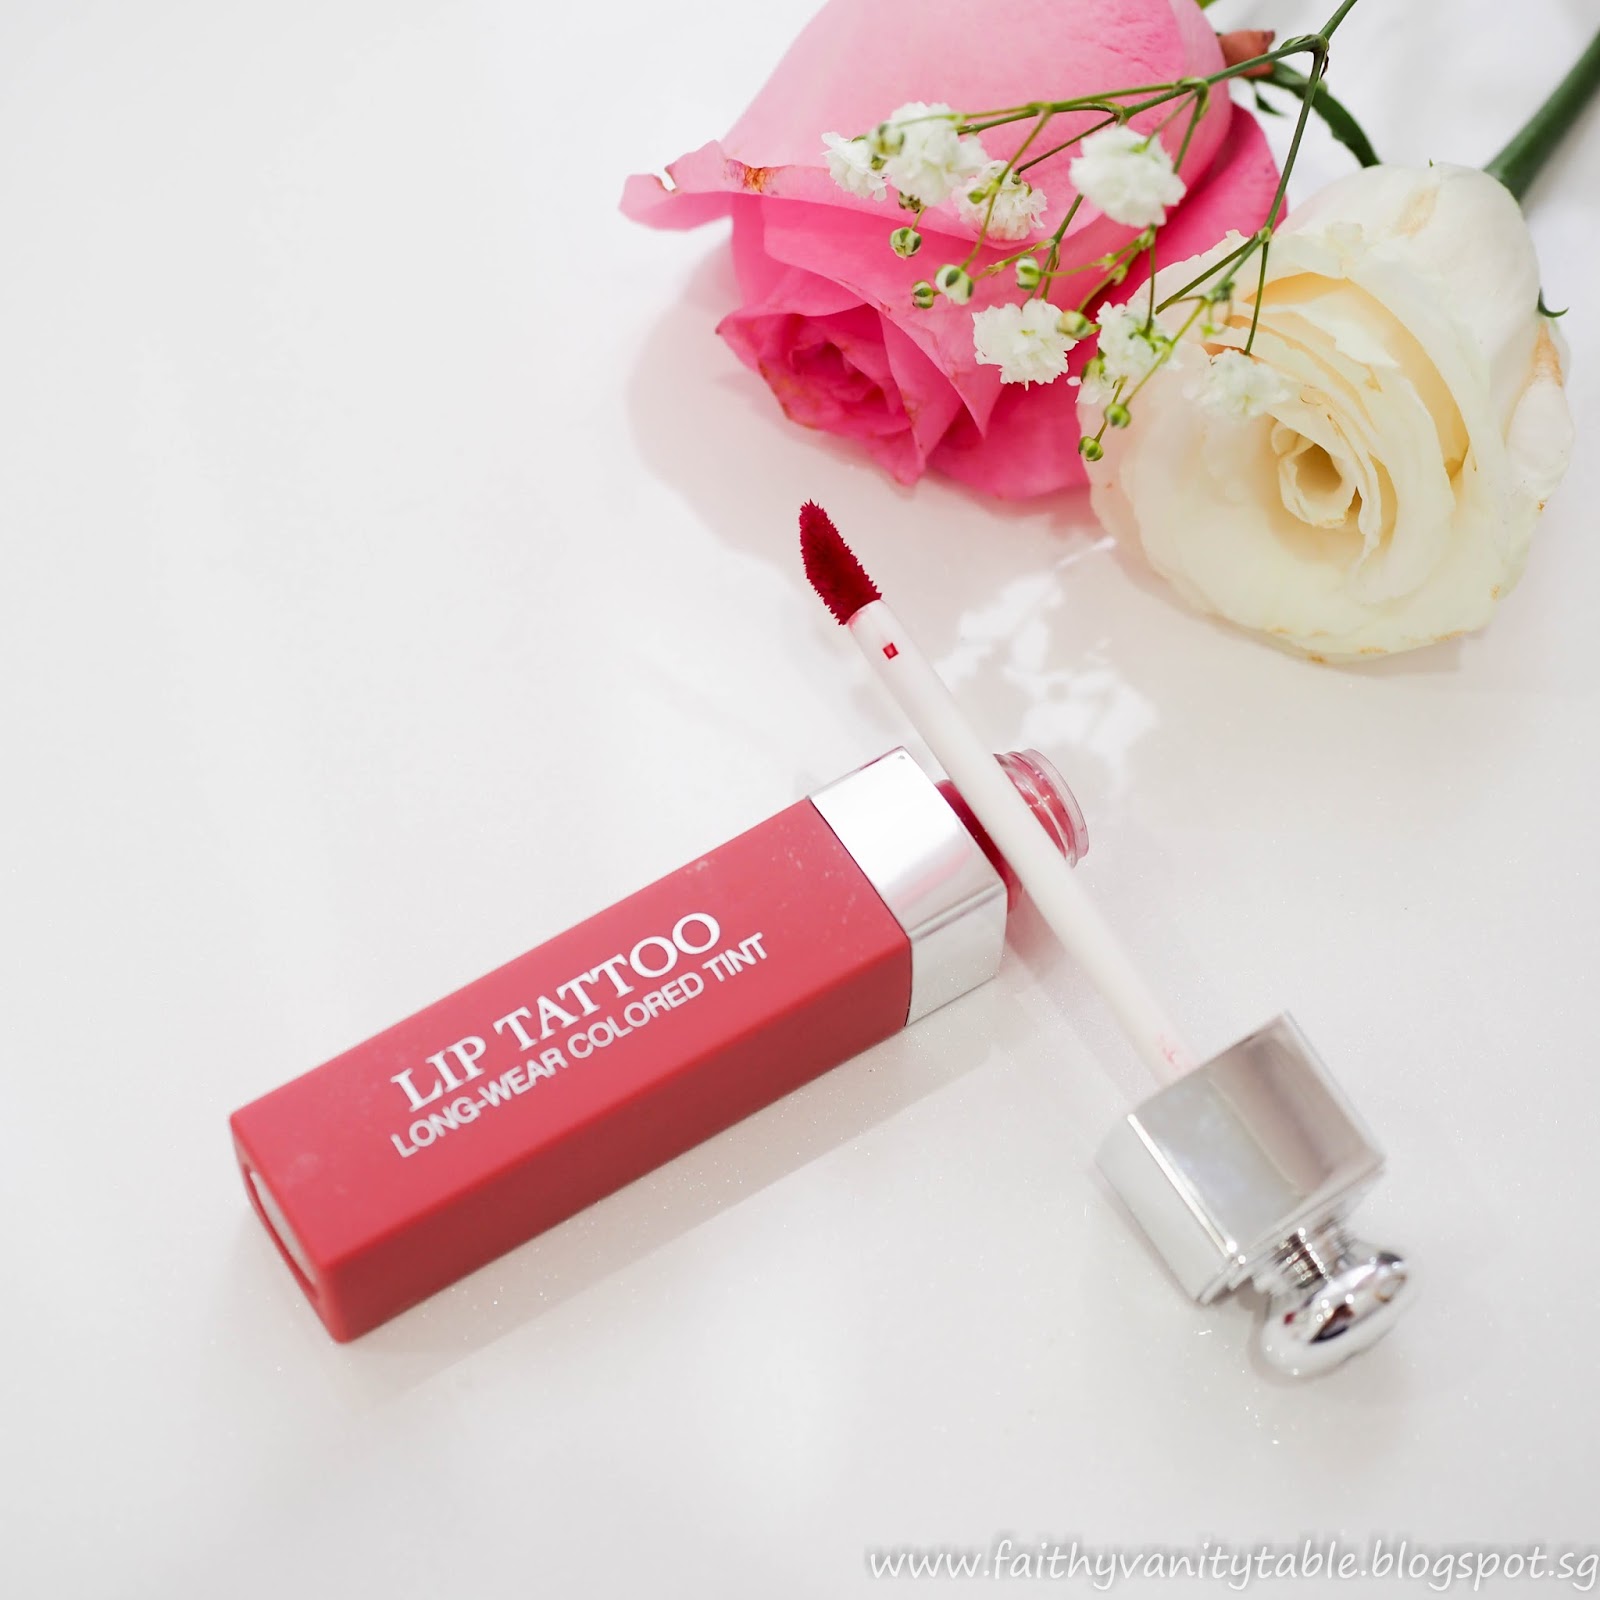 Dior Addict Lip Tattoo  LongWear Colored Tint  Review  Swatches   miranda loves